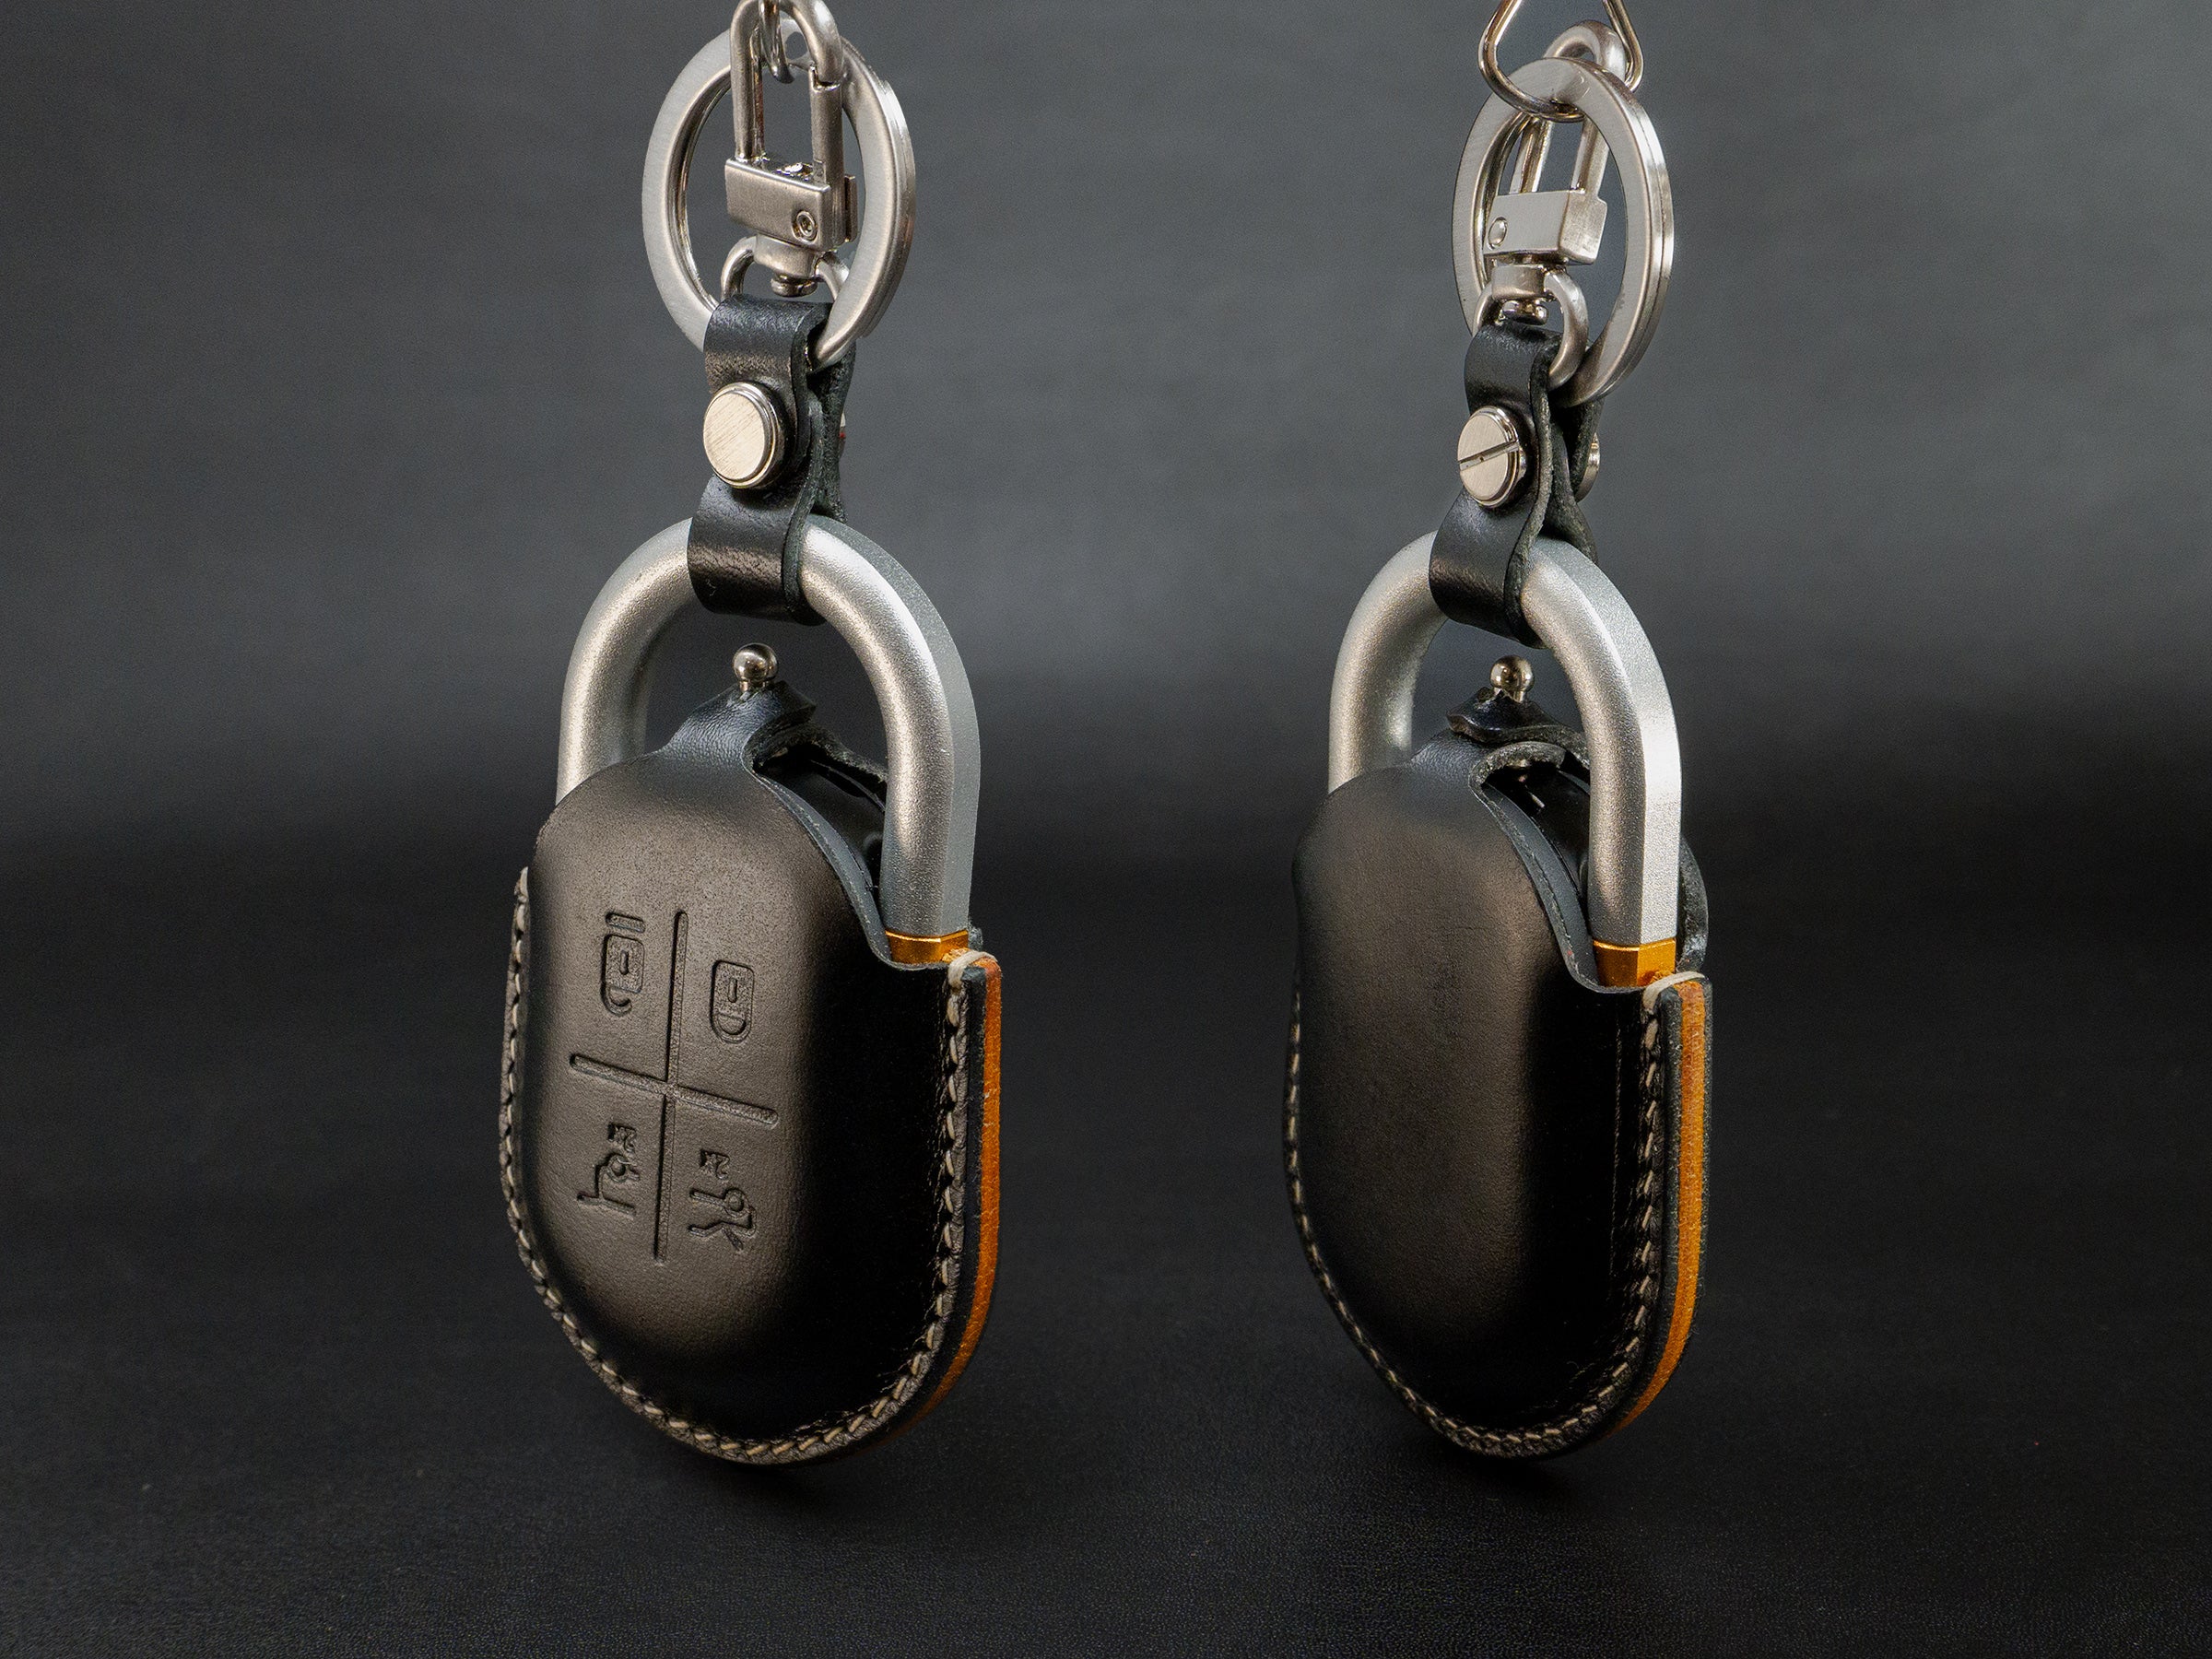 Rivian Series [1V2] Key Fob Cover - R1S R1T - Premium Veg-Tanned Leather - Handcrafted in USA